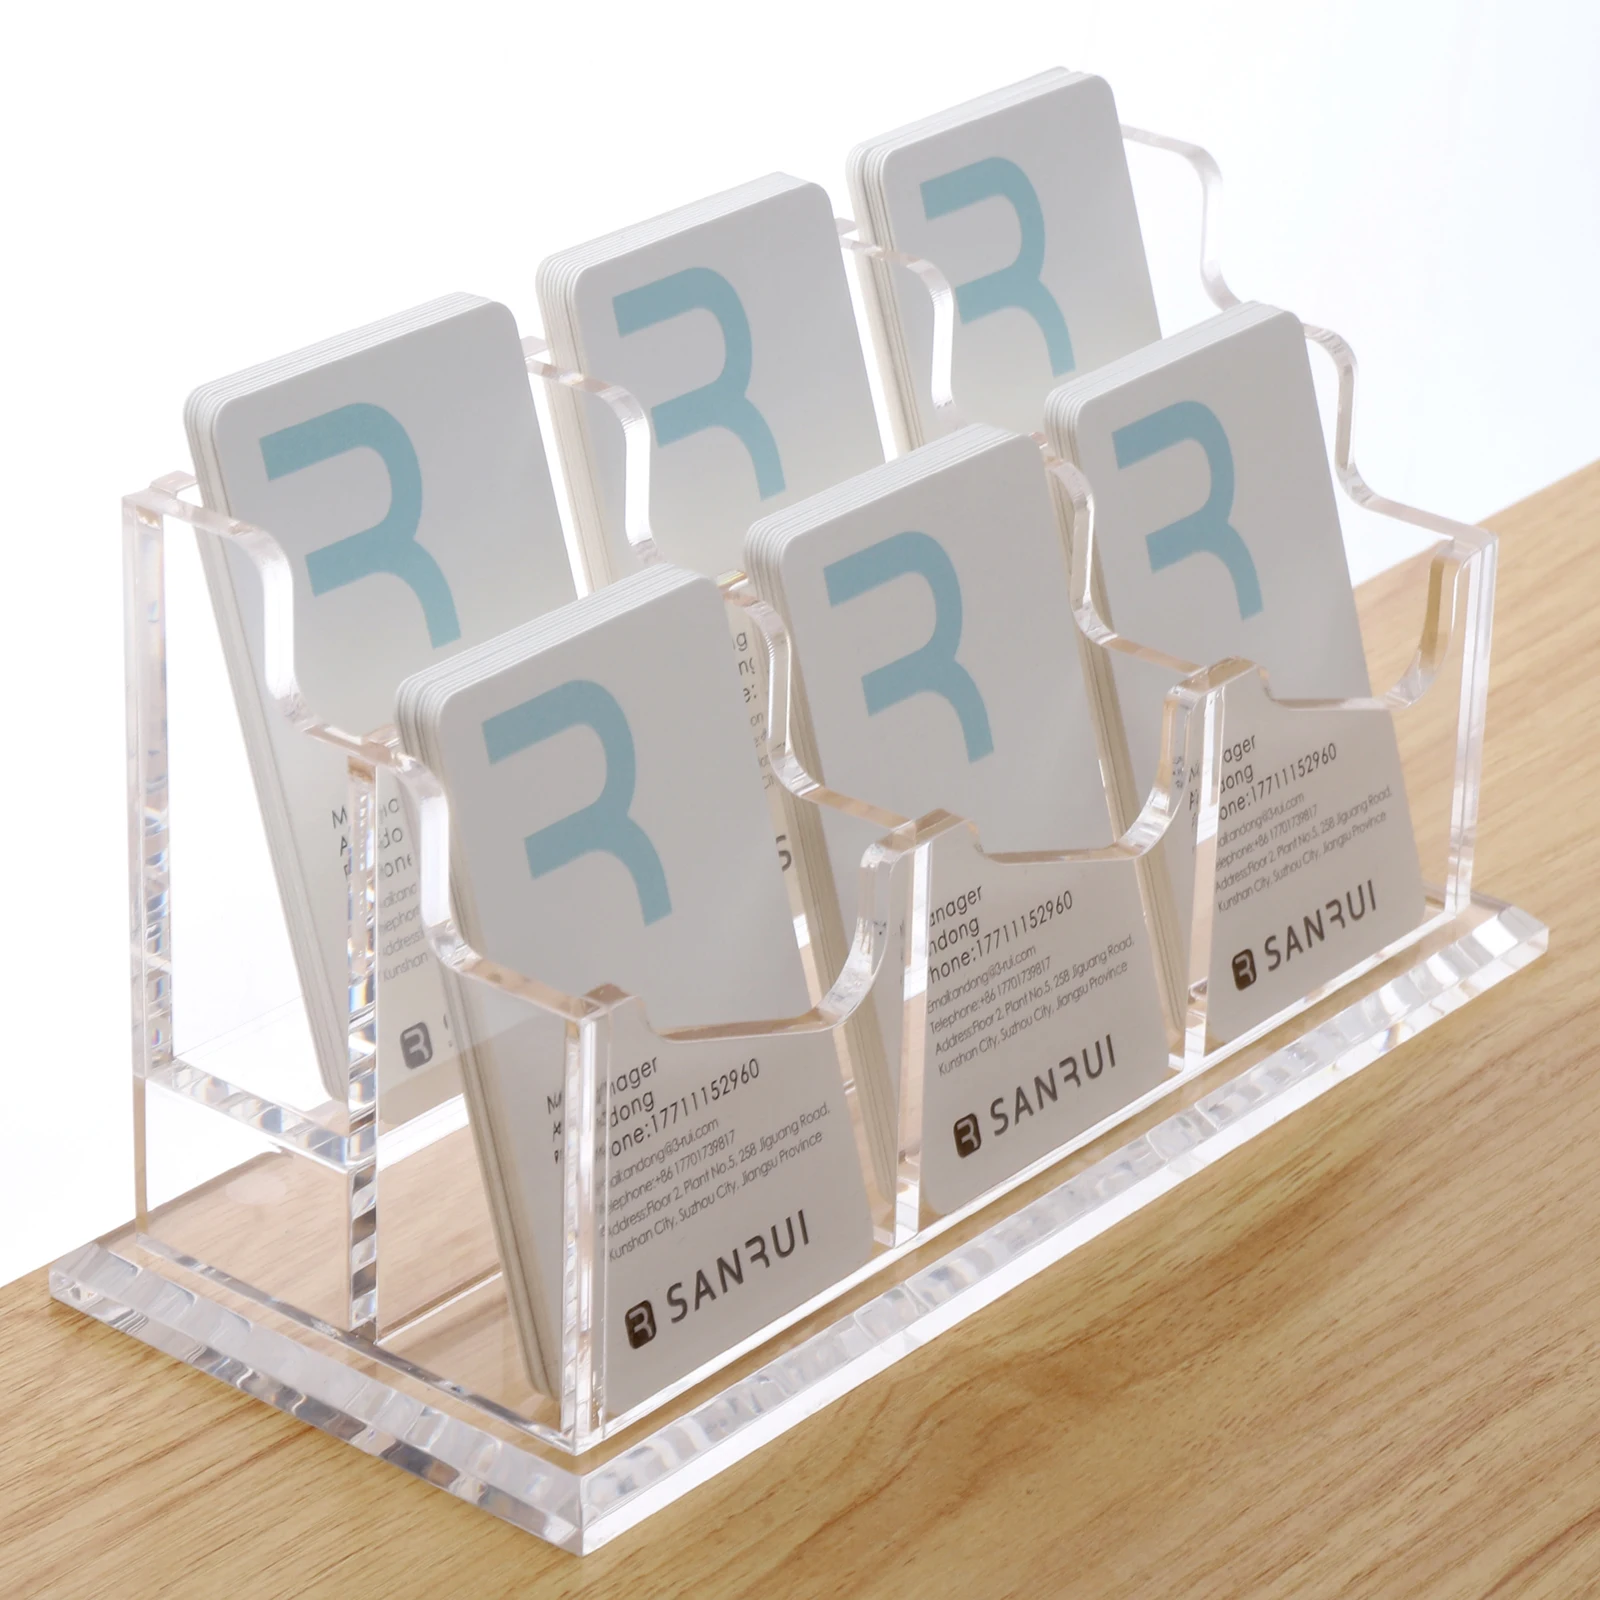 SANRUI Business Card Holder for Desk Vertical Card Display Stand Clear Acrylic 2 Tier 6 Pocket